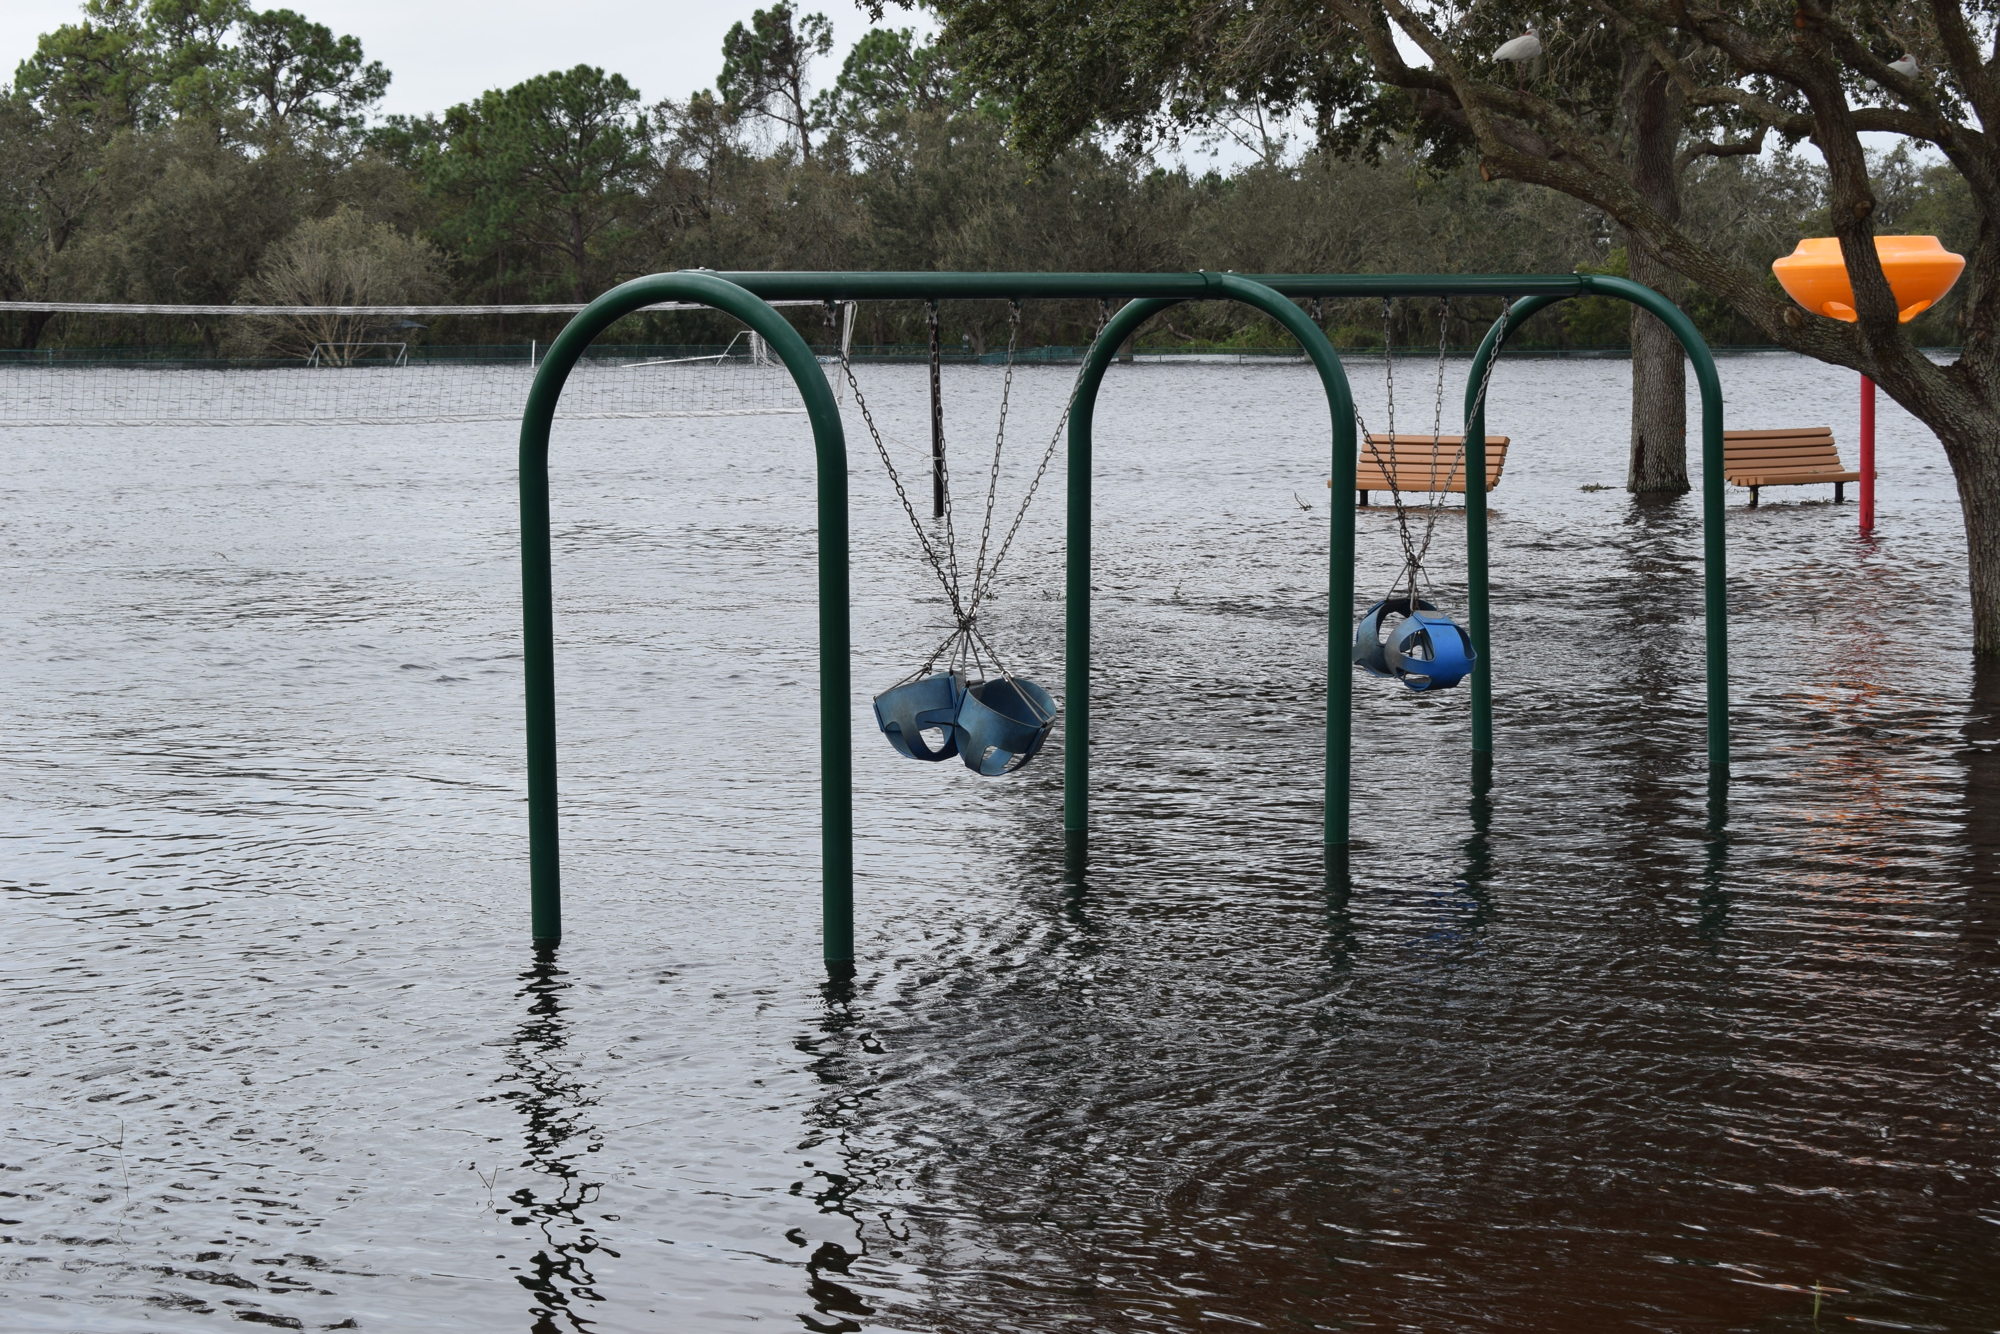 The baby swings at the Greenbrook Adventure Park in Lakewood Ranch offer an additional challenge after Hurricane Ian went through the area. (Photo by Jay Heater)